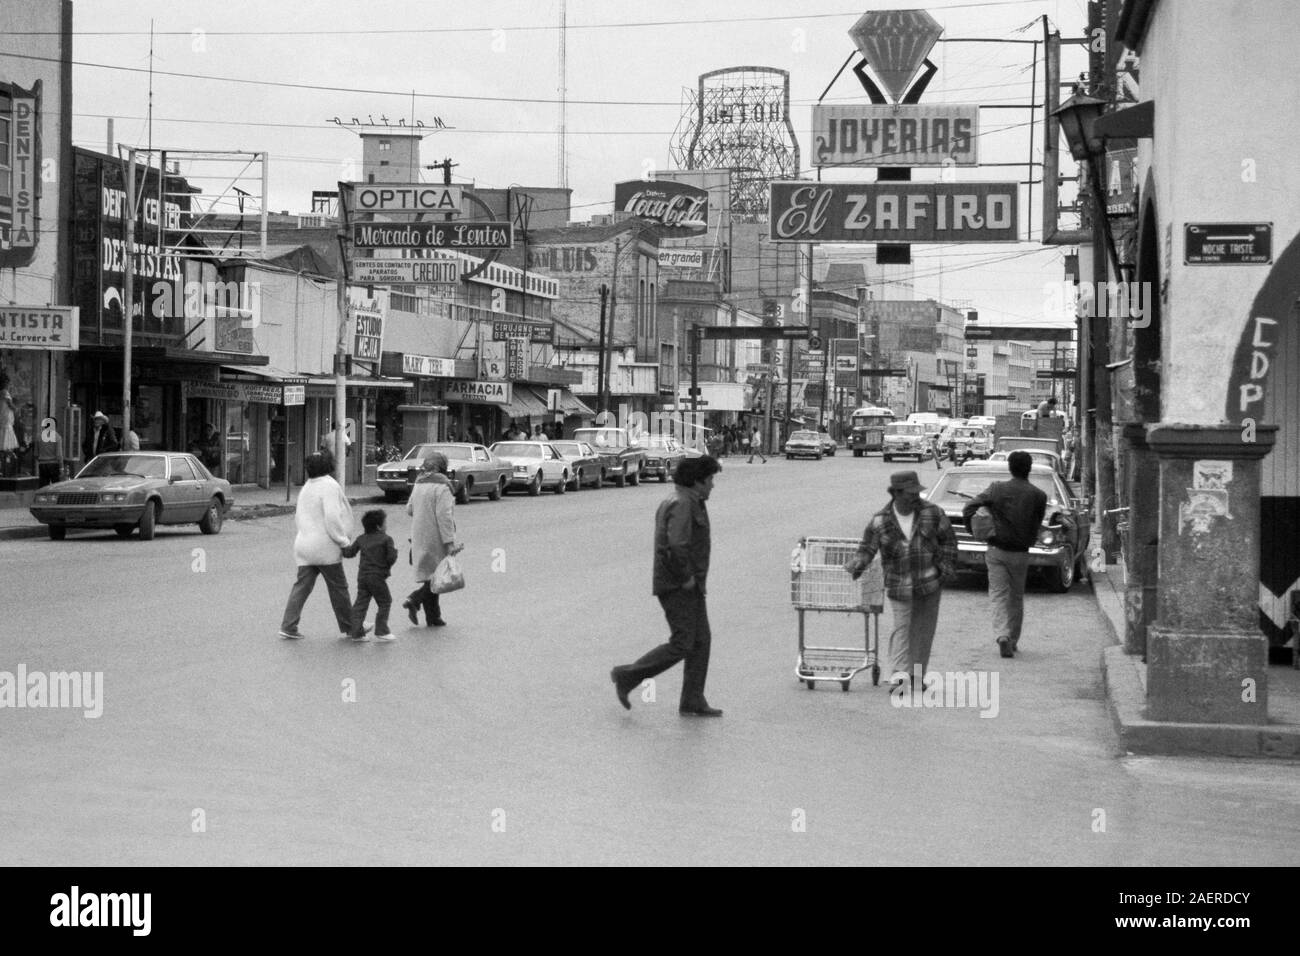 Ciudad Juarez, Chihuahua, Mexico - February, 1986:  Archival view of buildings, stores, traffic, signs and street life on Calle 16 de Septiembre. Stock Photo